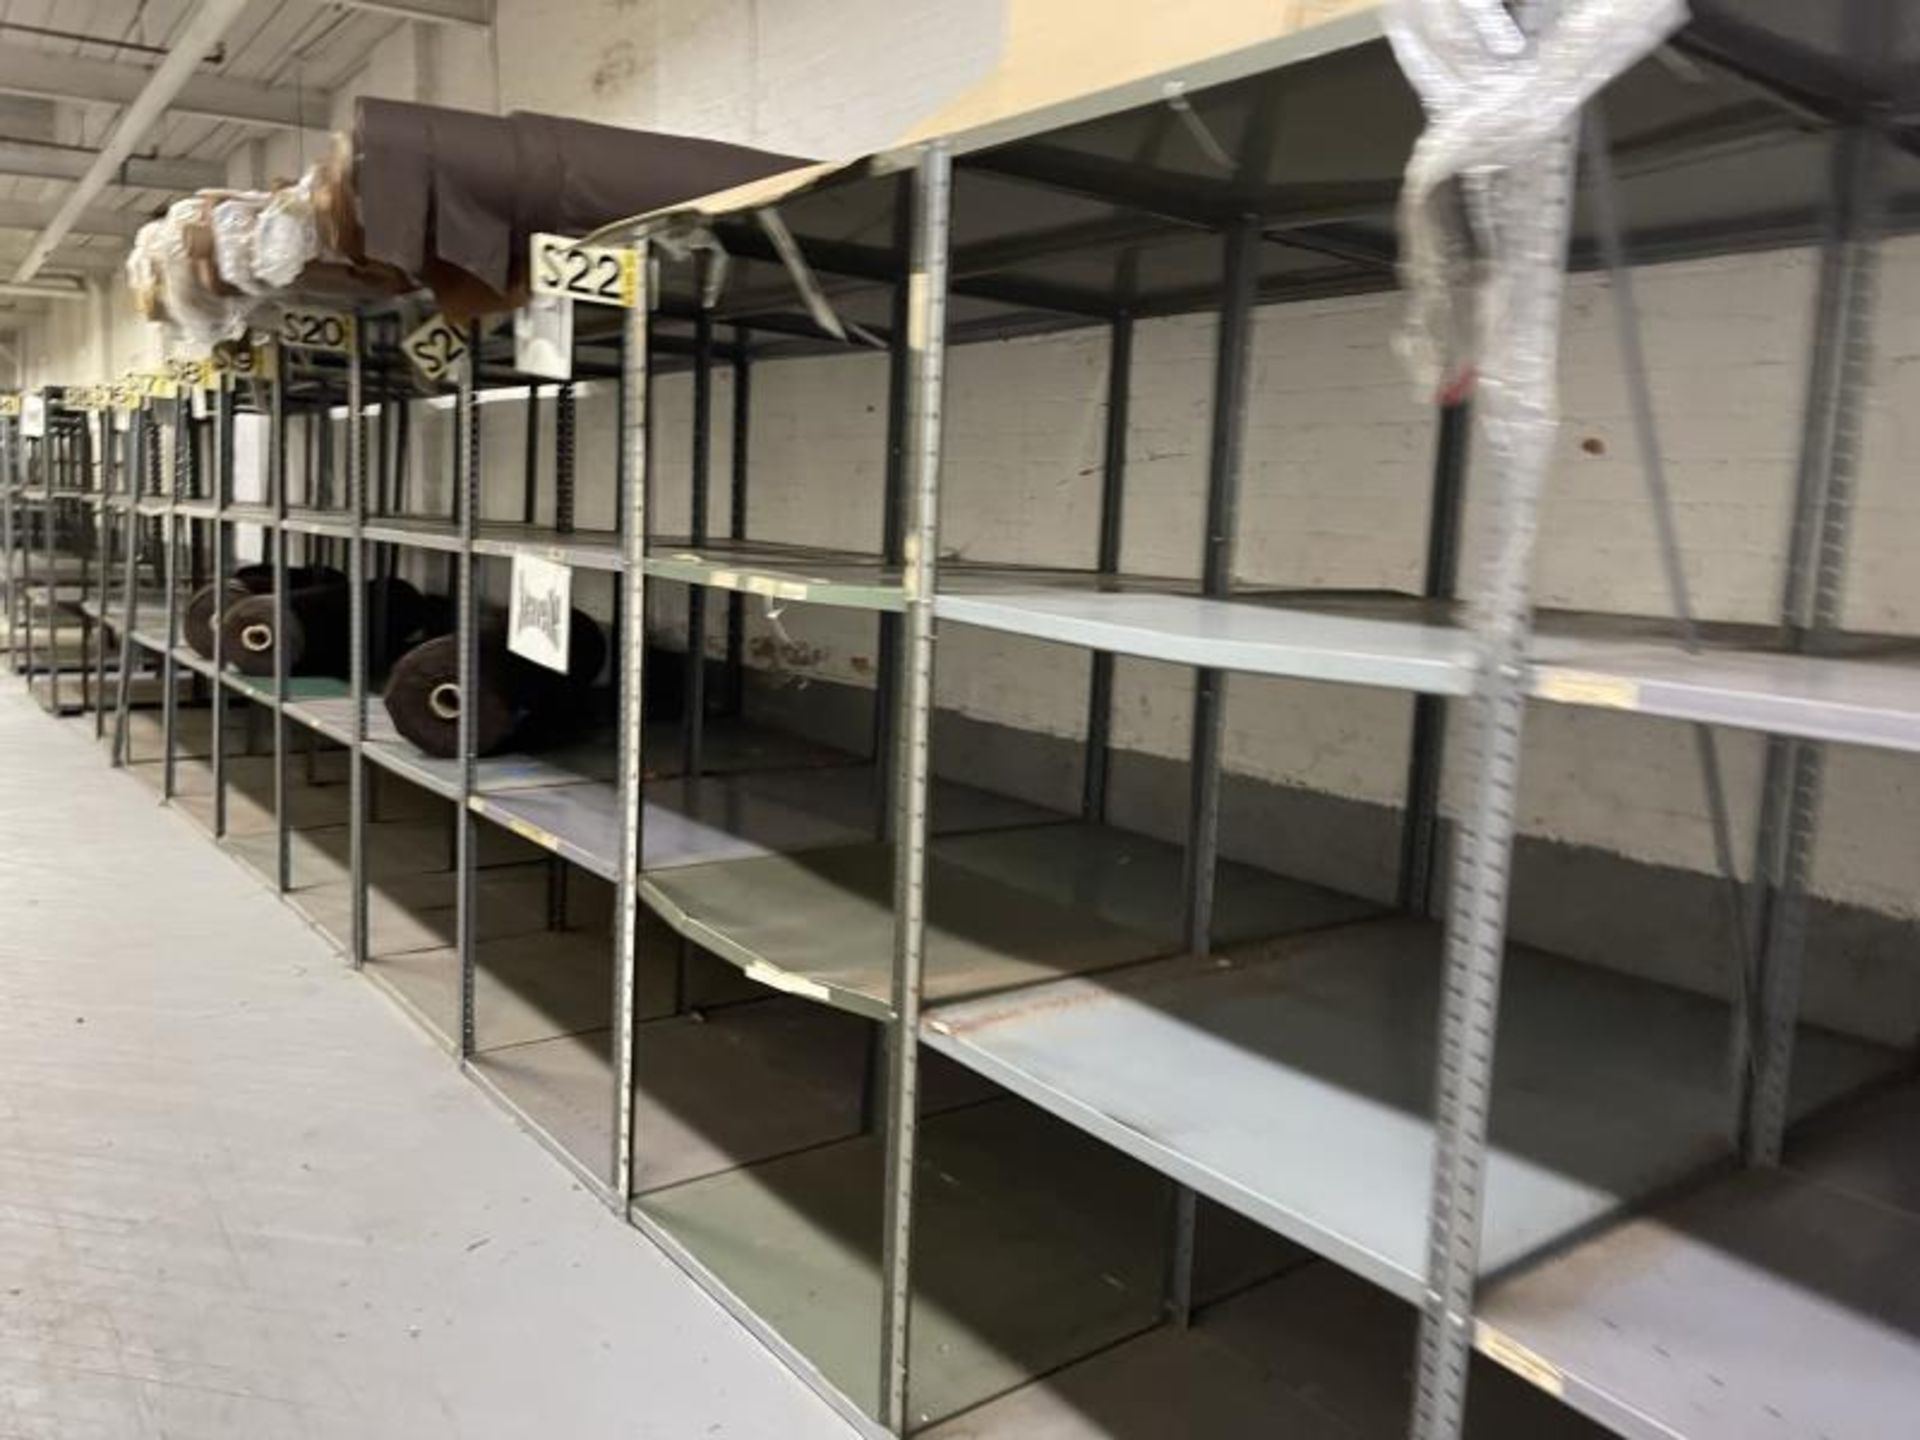 Lot of (28) Sections of Shelving each with Four Shelves, 3'x4', 75"Tall Shelves, 3'x4', 75"Tall - Image 2 of 3